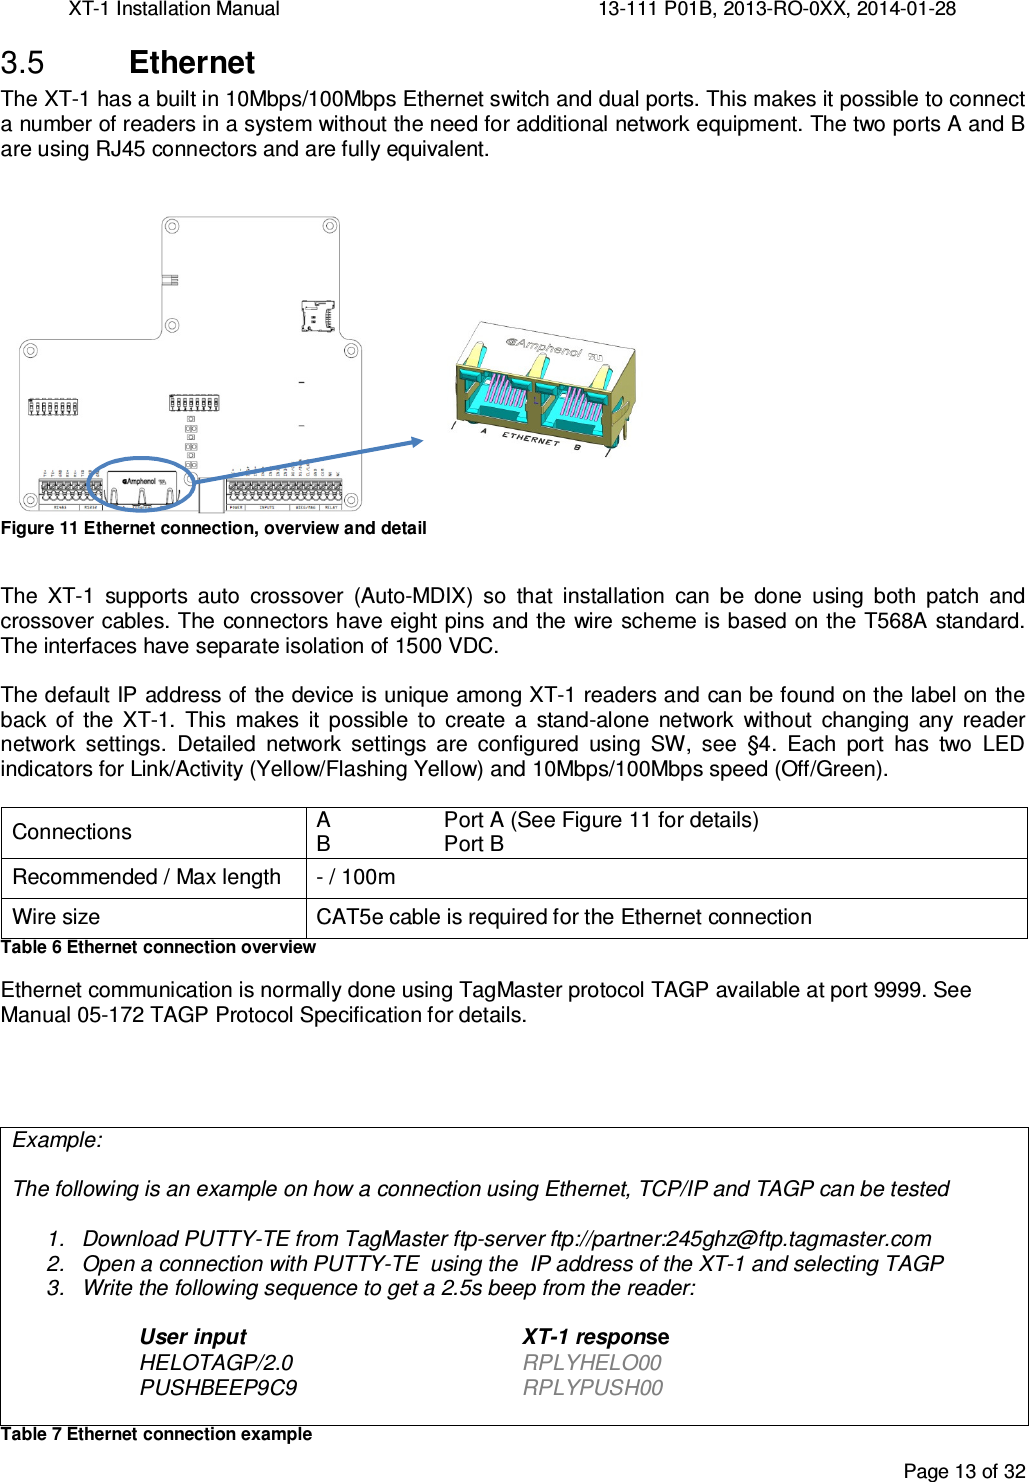 XT-1 Installation Manual     13-111 P01B, 2013-RO-0XX, 2014-01-28  Page 13 of 32   Ethernet 3.5The XT-1 has a built in 10Mbps/100Mbps Ethernet switch and dual ports. This makes it possible to connect a number of readers in a system without the need for additional network equipment. The two ports A and B are using RJ45 connectors and are fully equivalent.    Figure 11 Ethernet connection, overview and detail  The  XT-1  supports  auto  crossover  (Auto-MDIX)  so  that  installation  can  be  done  using  both  patch  and crossover cables. The connectors have eight pins and the wire scheme is based on the T568A standard. The interfaces have separate isolation of 1500 VDC.  The default IP address of the device is unique among XT-1 readers and can be found on the label on the back  of  the  XT-1.  This  makes  it  possible  to  create  a  stand-alone  network  without  changing  any  reader network  settings.  Detailed  network  settings  are  configured  using  SW,  see  §4.  Each  port  has  two  LED indicators for Link/Activity (Yellow/Flashing Yellow) and 10Mbps/100Mbps speed (Off/Green).  Connections  A  Port A (See Figure 11 for details) B  Port B Recommended / Max length  - / 100m Wire size  CAT5e cable is required for the Ethernet connection Table 6 Ethernet connection overview Ethernet communication is normally done using TagMaster protocol TAGP available at port 9999. See Manual 05-172 TAGP Protocol Specification for details.     Example:  The following is an example on how a connection using Ethernet, TCP/IP and TAGP can be tested  1.  Download PUTTY-TE from TagMaster ftp-server ftp://partner:245ghz@ftp.tagmaster.com  2.  Open a connection with PUTTY-TE  using the  IP address of the XT-1 and selecting TAGP 3.  Write the following sequence to get a 2.5s beep from the reader:  User input      XT-1 response HELOTAGP/2.0    RPLYHELO00 PUSHBEEP9C9    RPLYPUSH00  Table 7 Ethernet connection example 